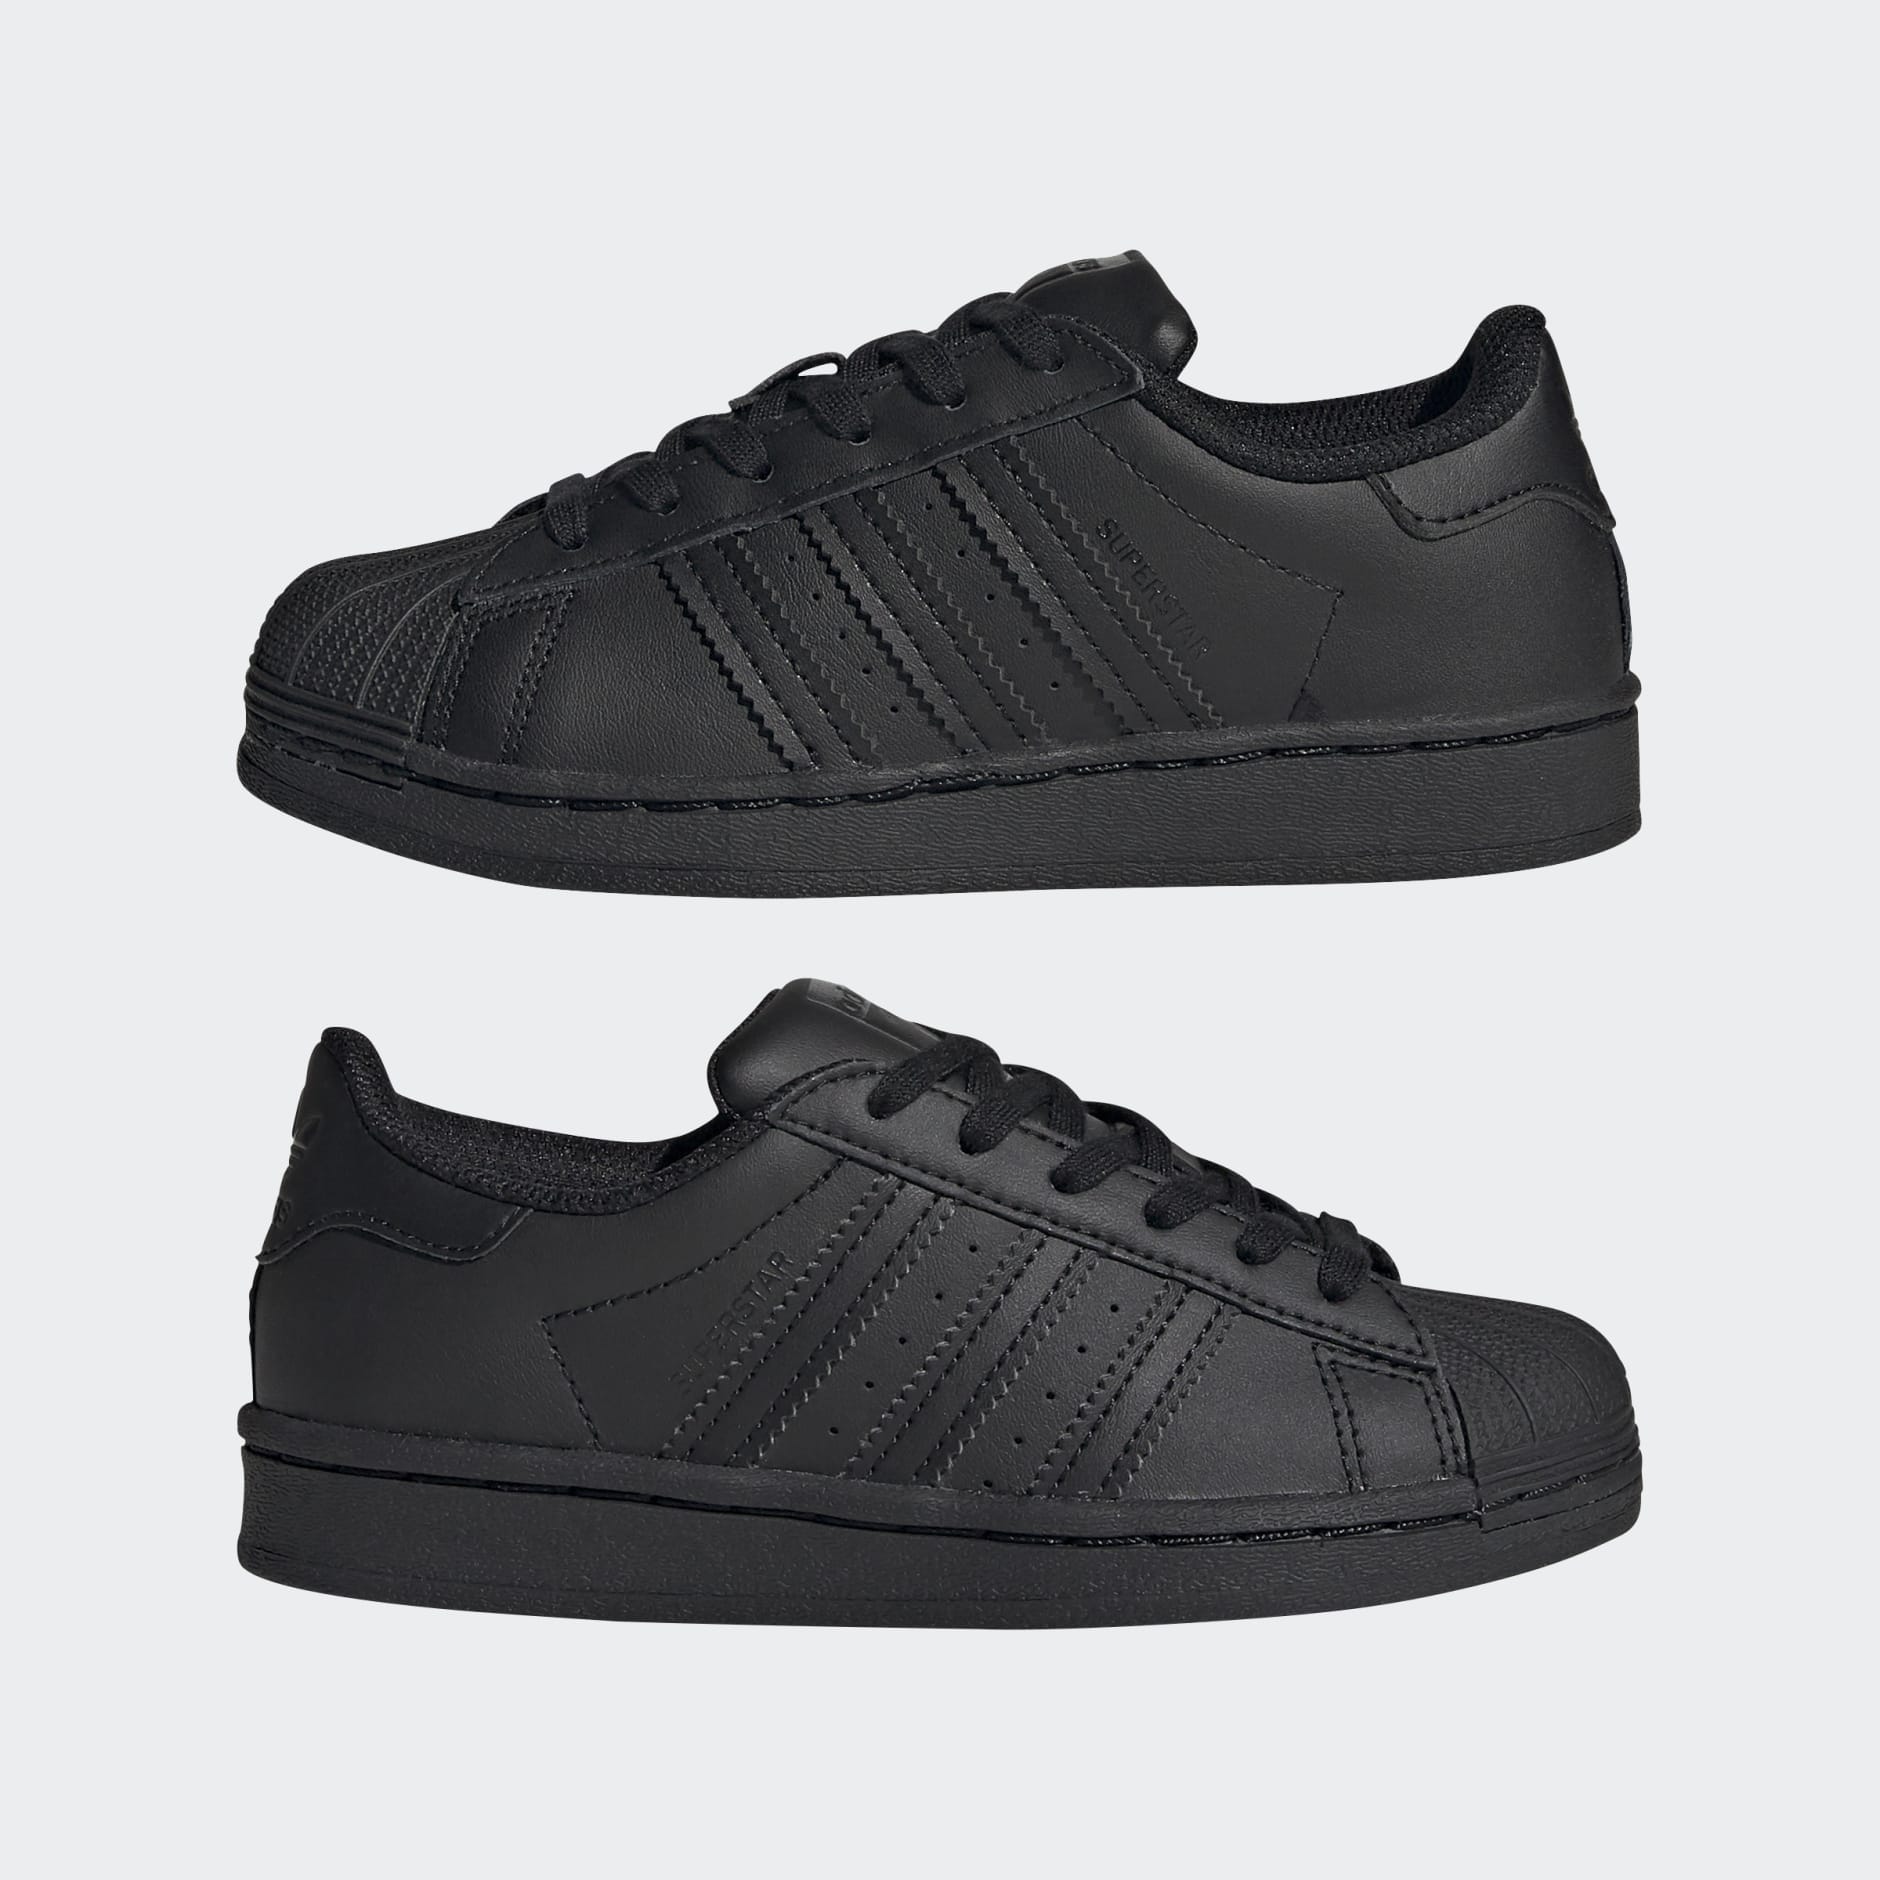 adidas superstar shoes all black